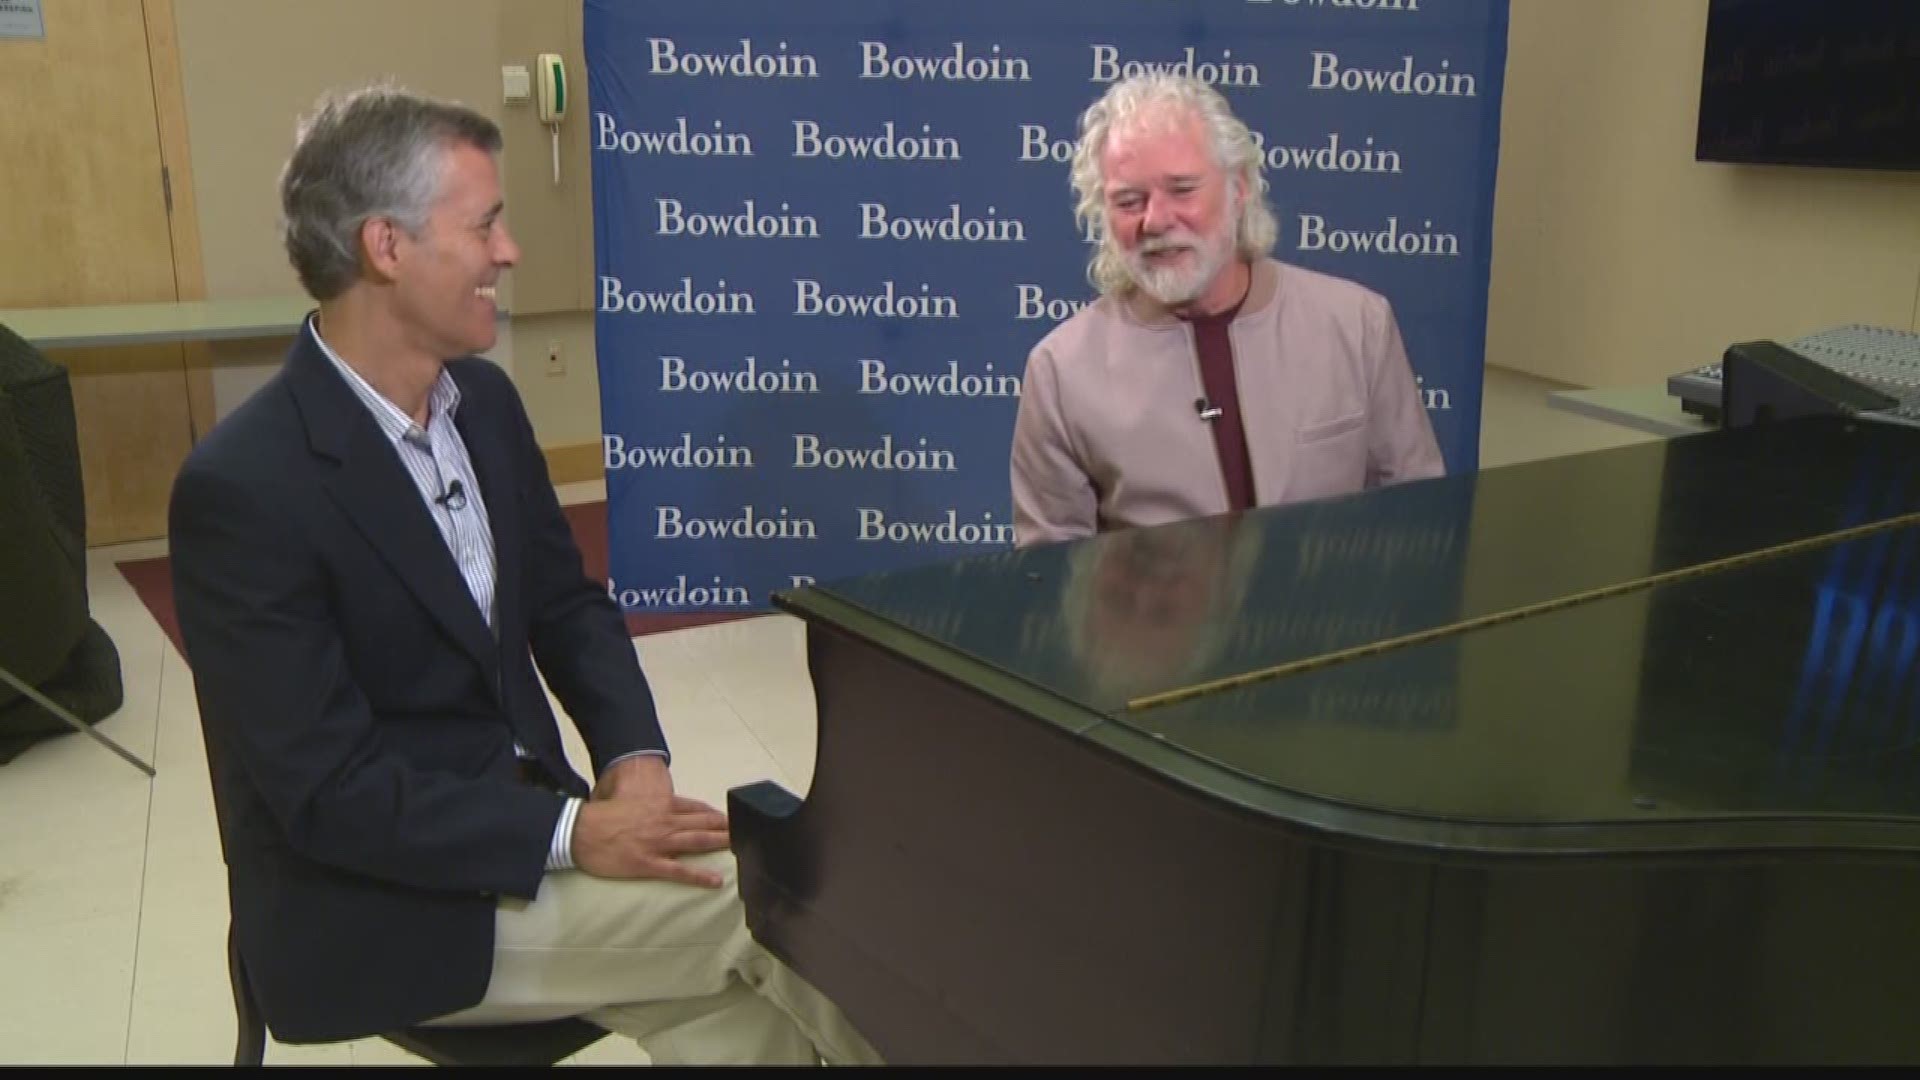 More of our conversation with Chuck Leavell